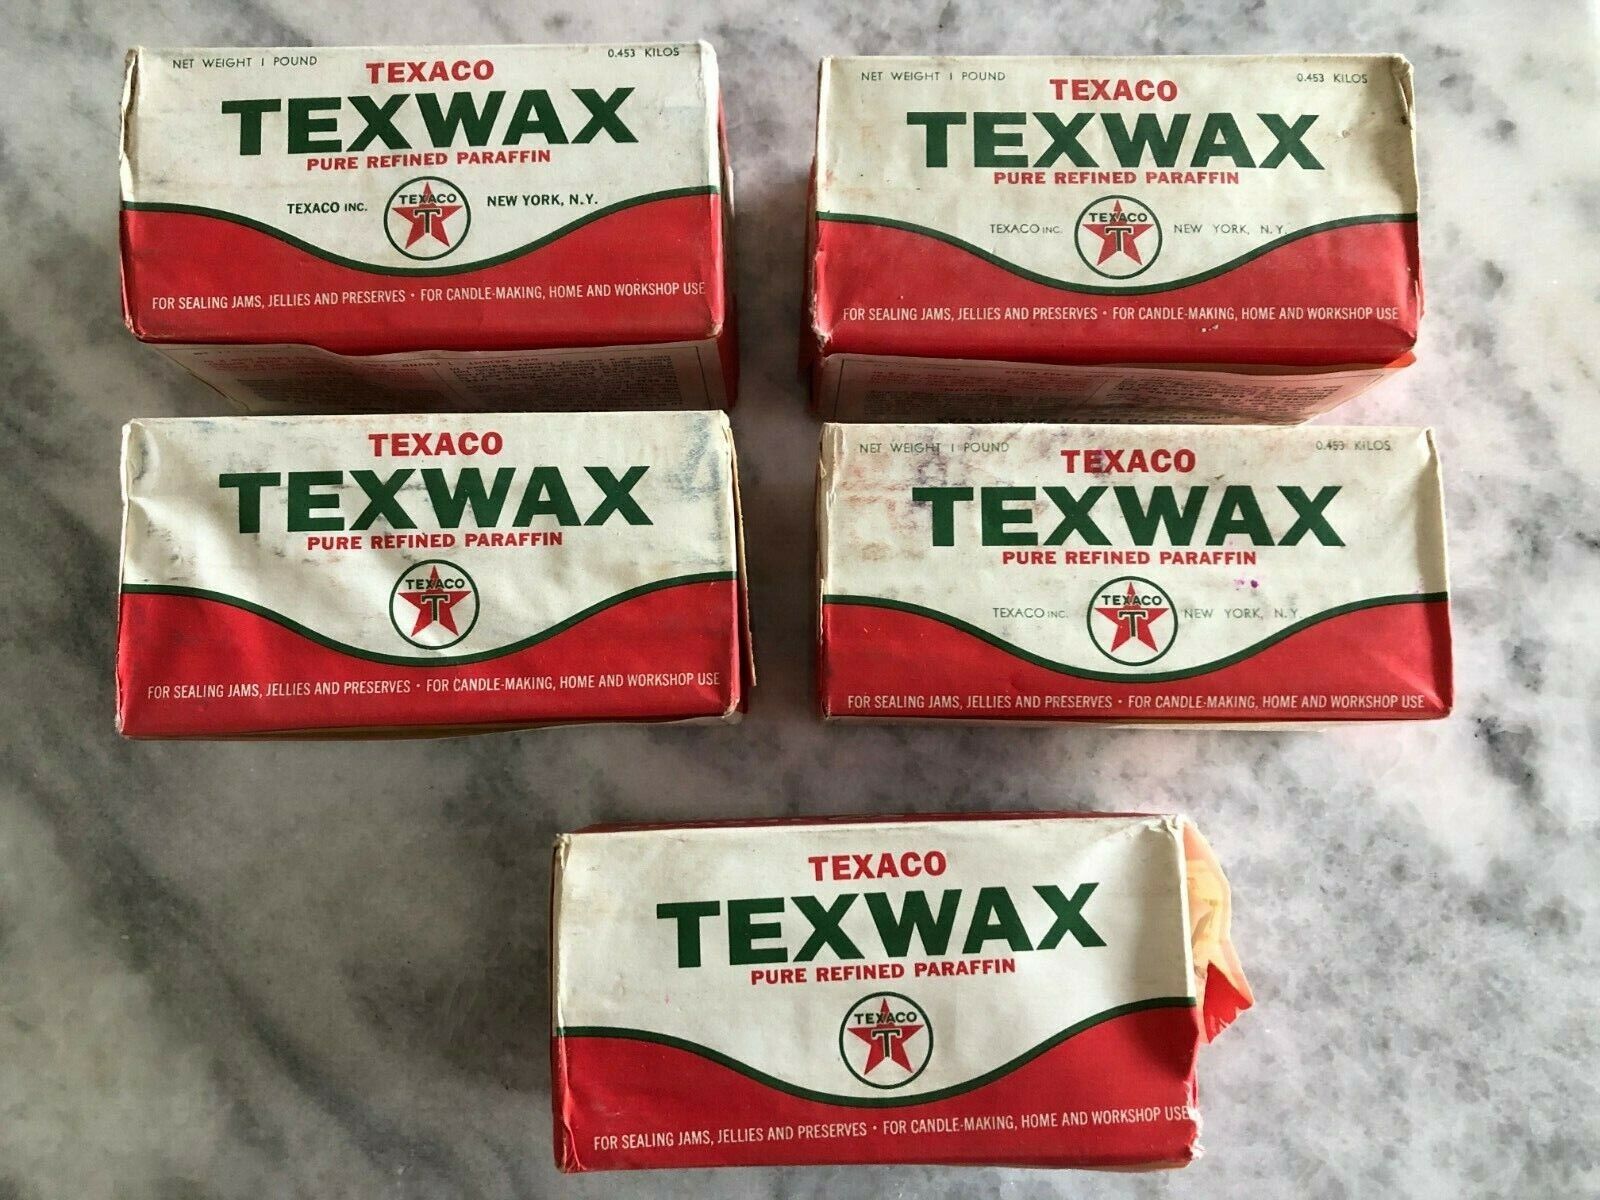 Vintage TEXACO Texwax Pure Refined Paraffin, 1LB Package - Price is for one